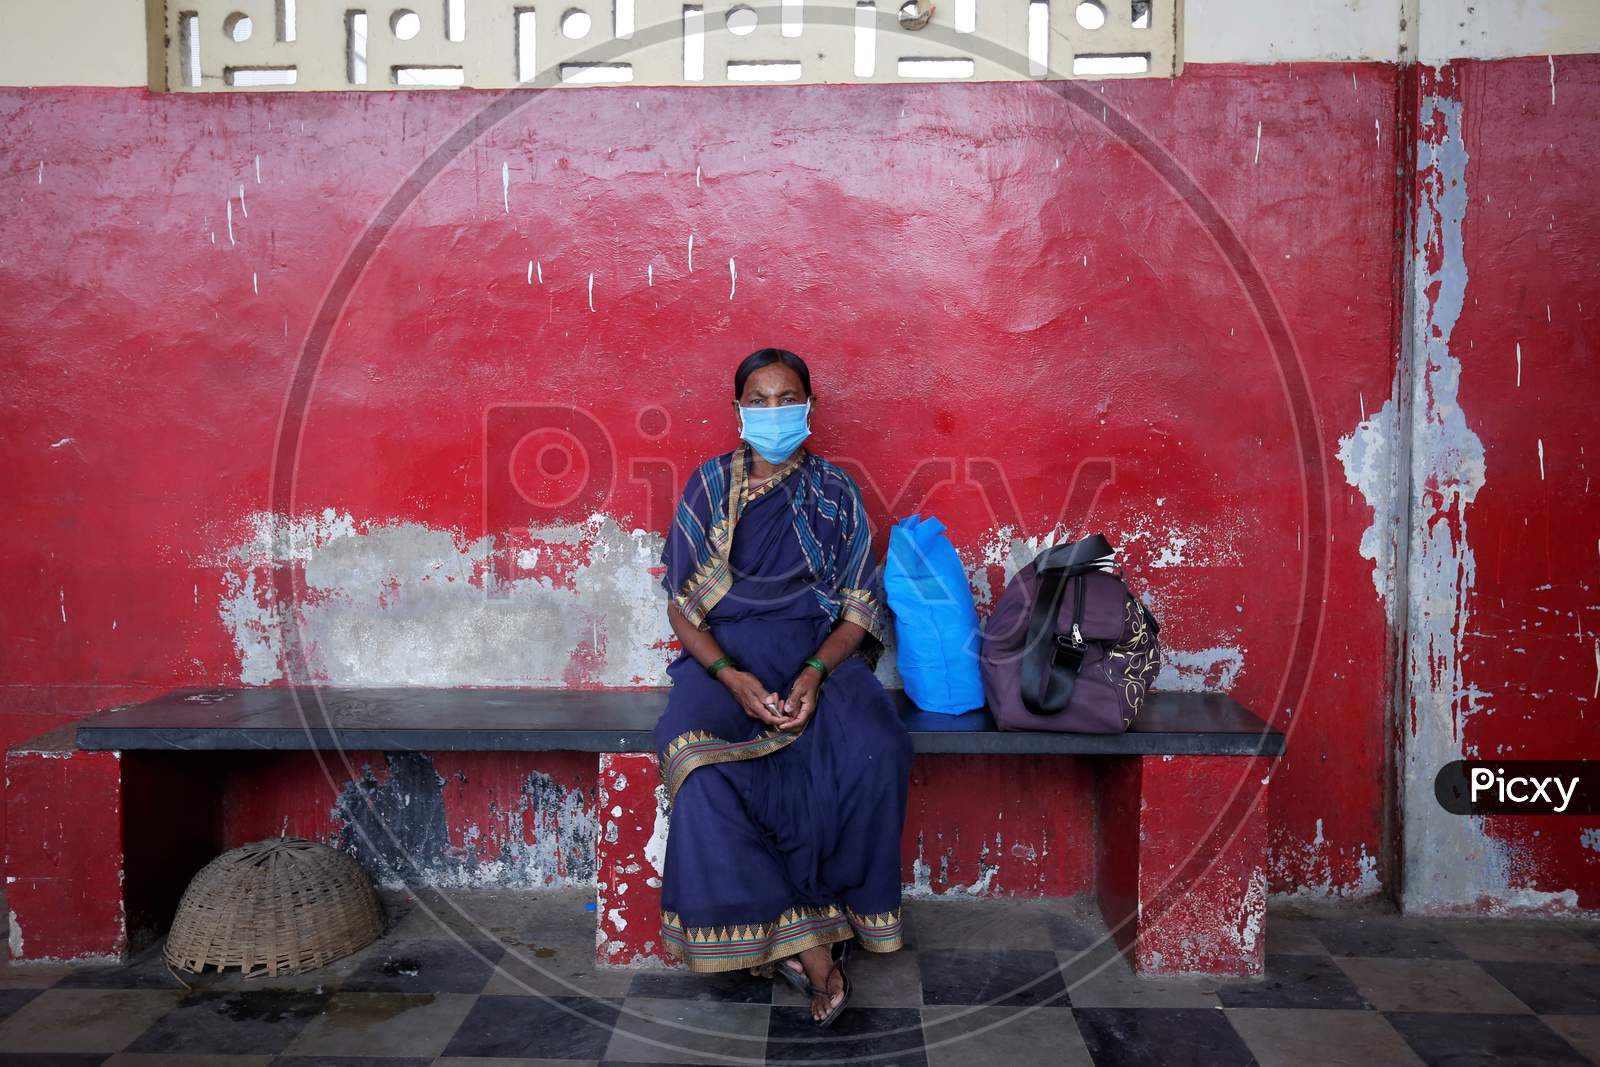 A woman wears a mask and waits for a public transport bus in a bus station after the state eased lockdown norms during the nationwide lockdown to prevent the spread of coronavirus (COVID-19) in Bangalore, India.